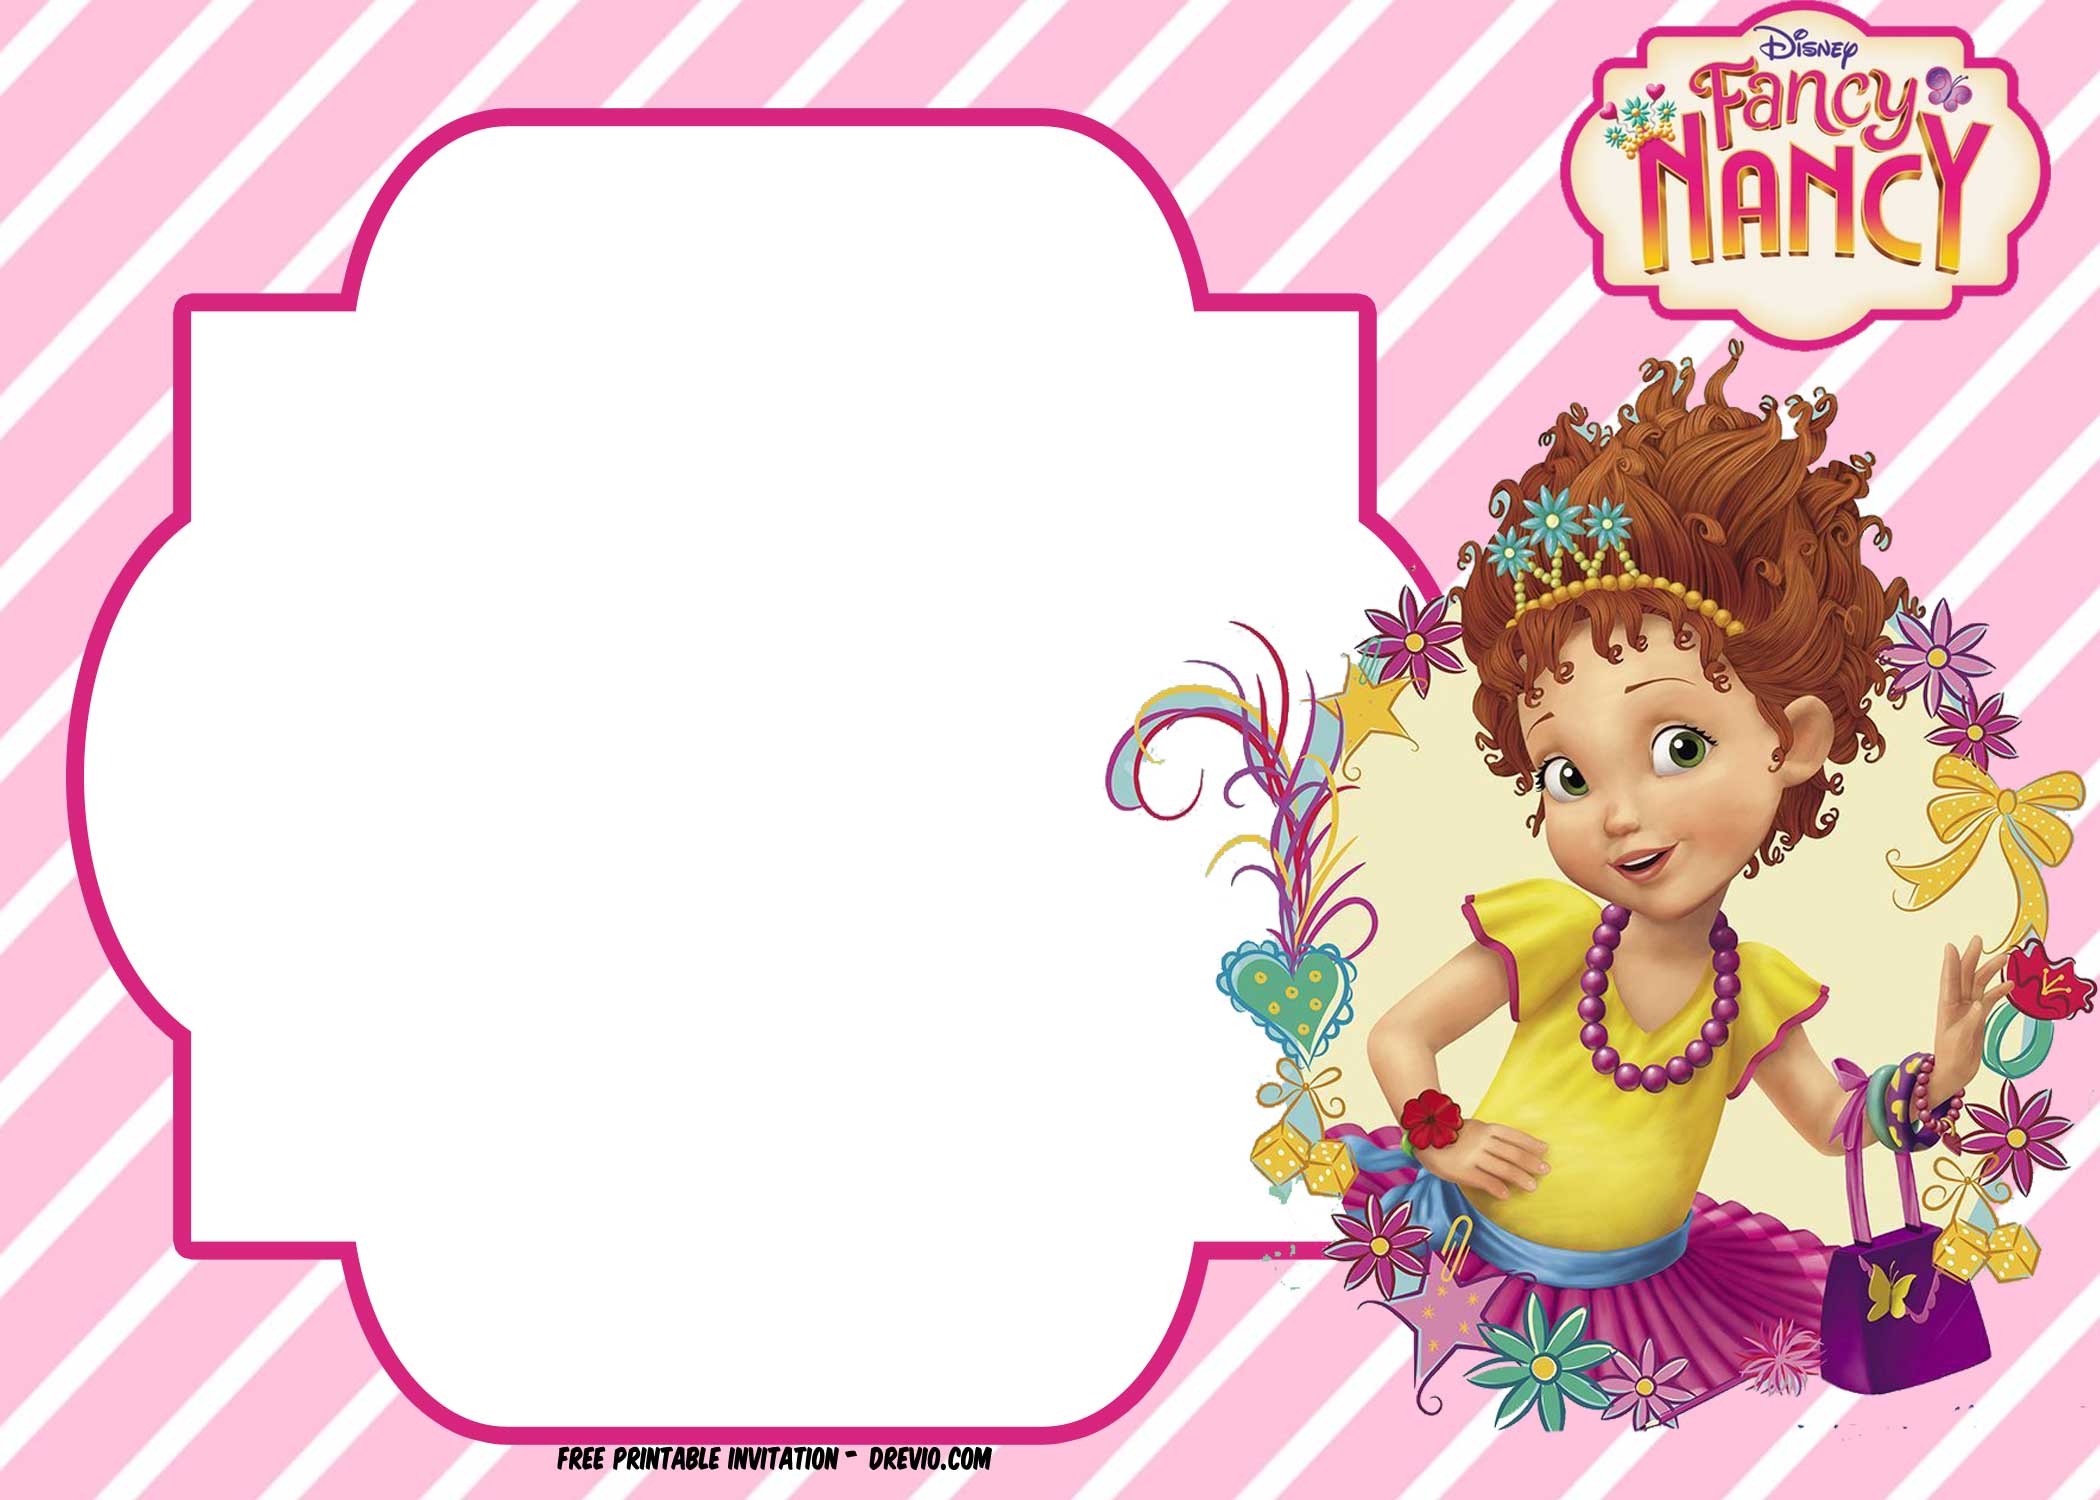 free-fancy-nancy-invitation-templates-updated-free-printable